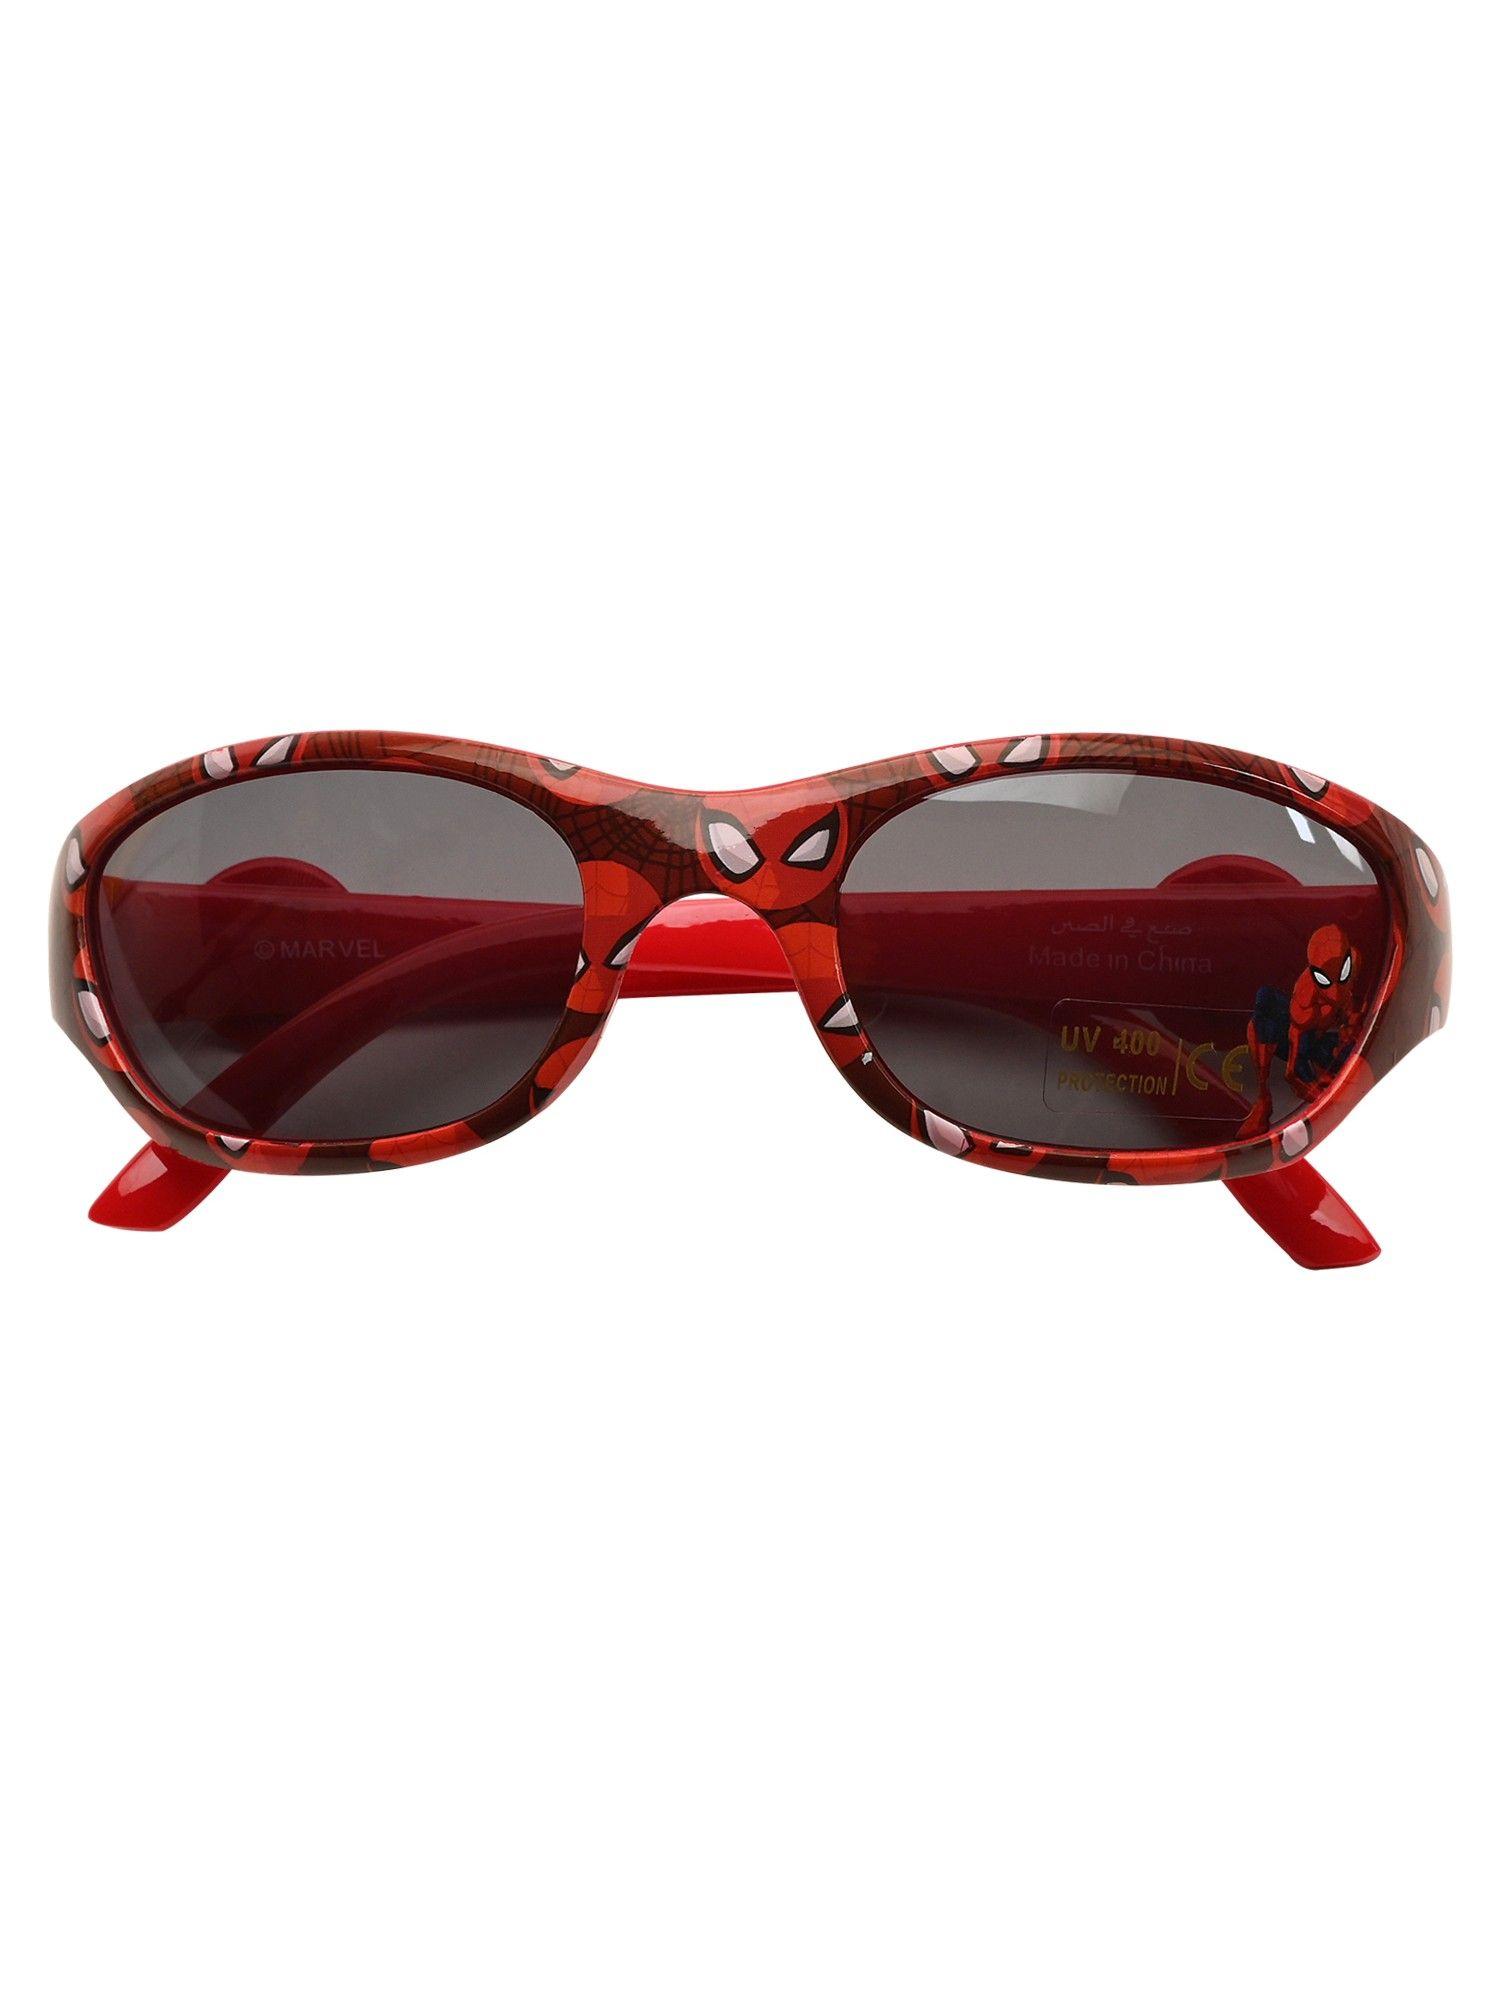 kids-spiderman-sunglasses-with-pouch